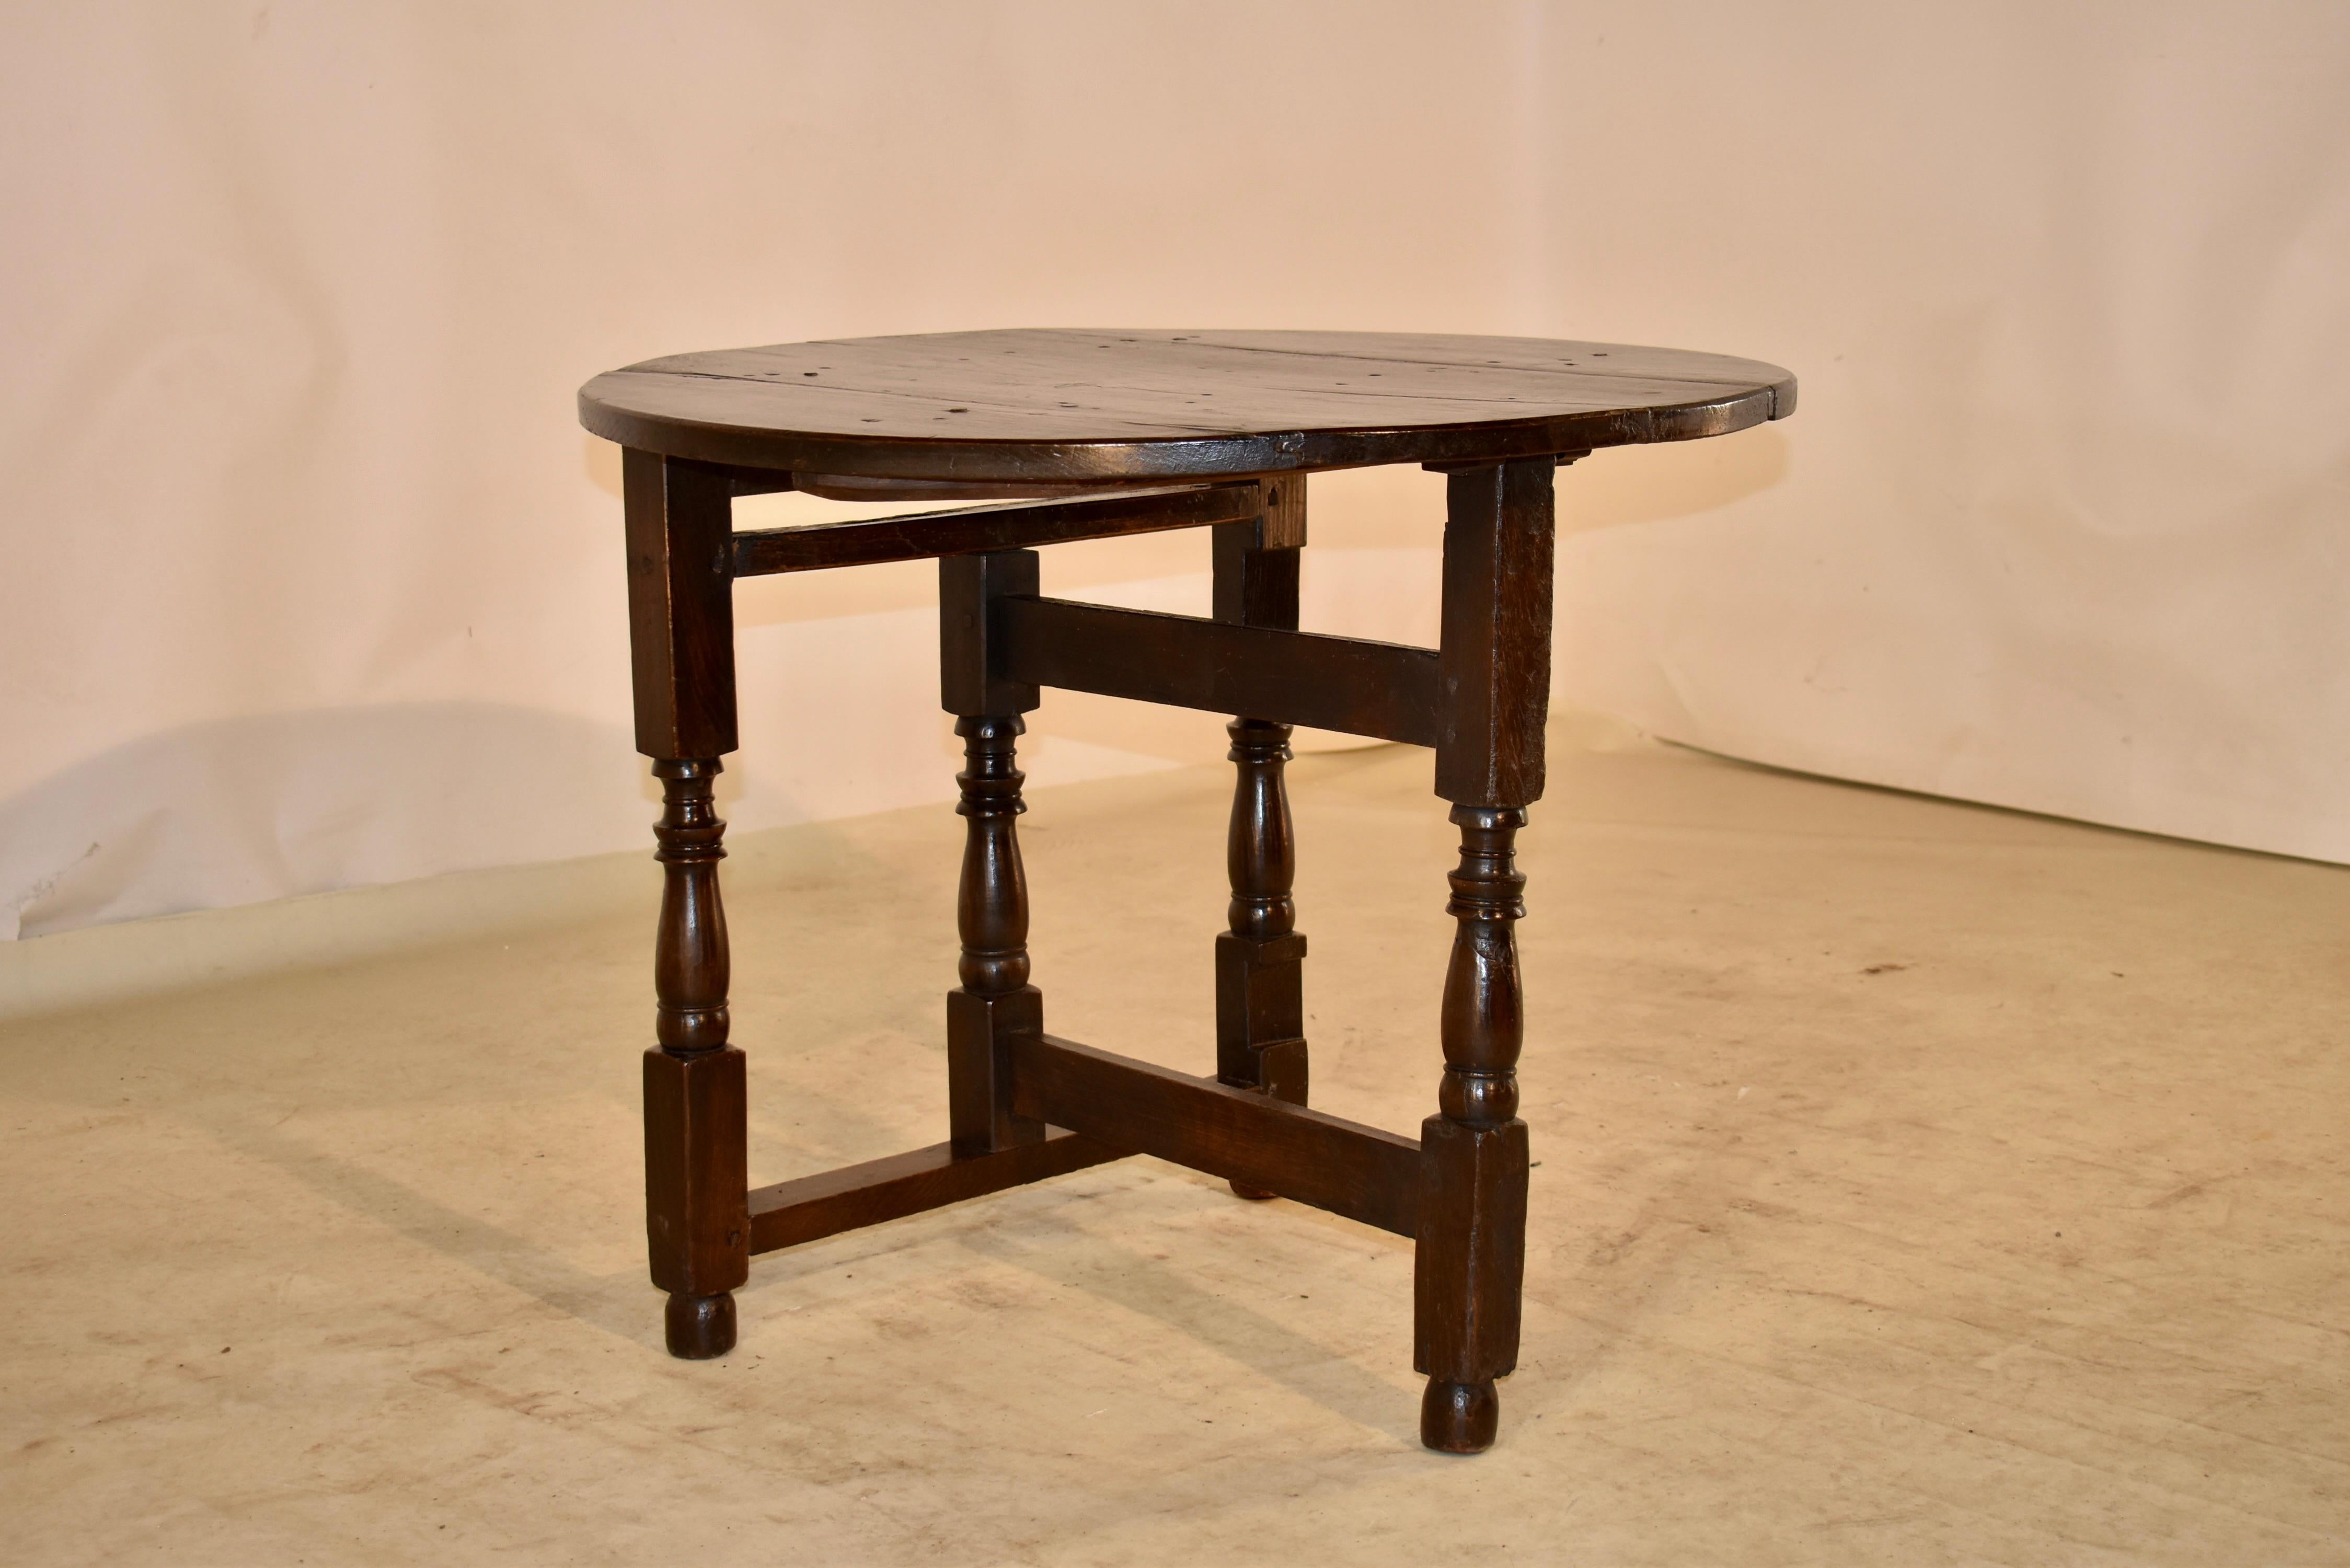 English 17th Century Folding Carriage Table